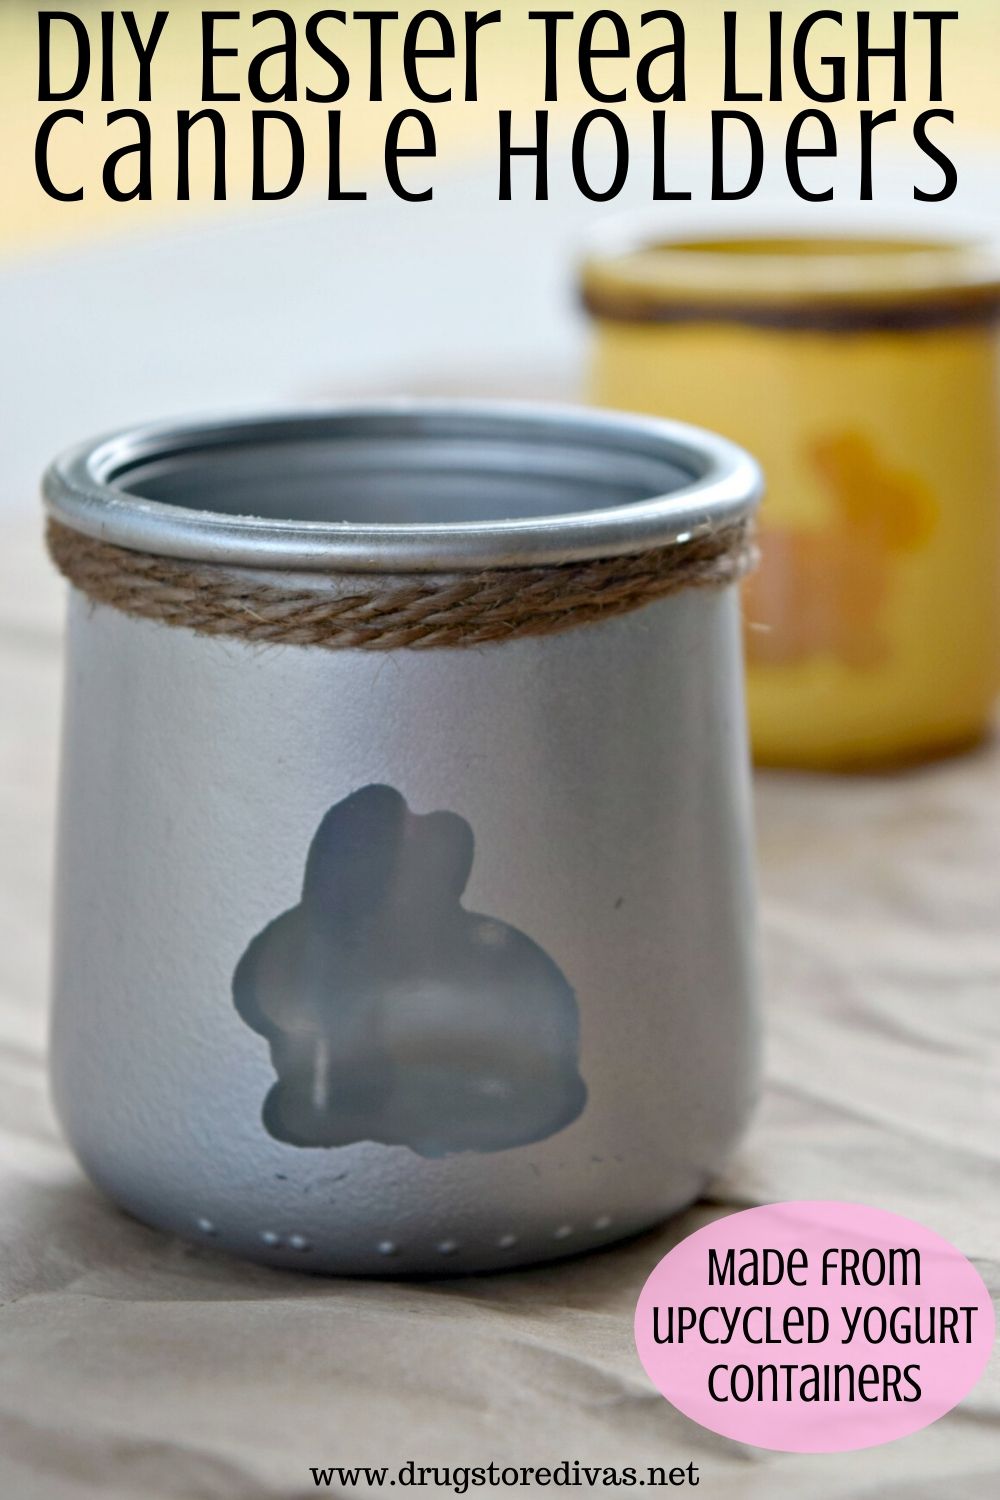 These DIY Easter Tea Light Candle Holders are the perfect Easter gift. And they're made from yogurt containers! Find out how at www.drugstoredivas.net.